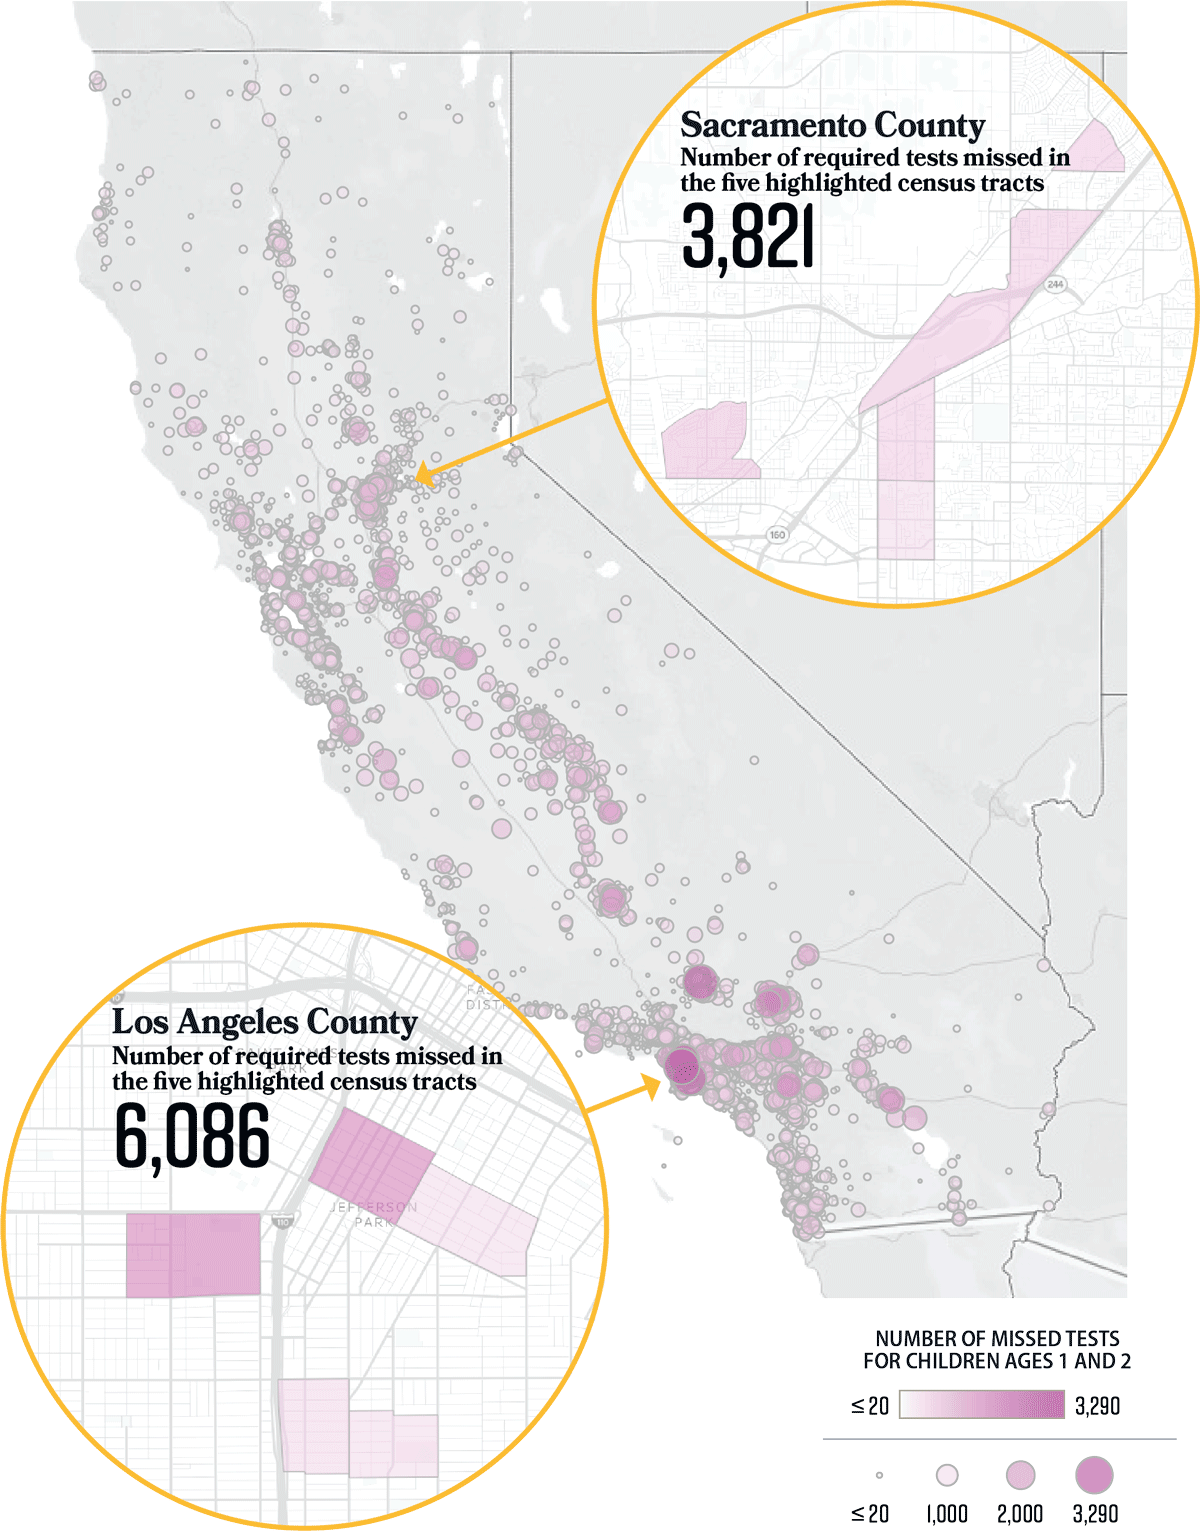 A map of California showing that missed lead tests are concentrated in mostly the urban parts of the State, with pullouts for Sacramento and Los Angeles Counties.